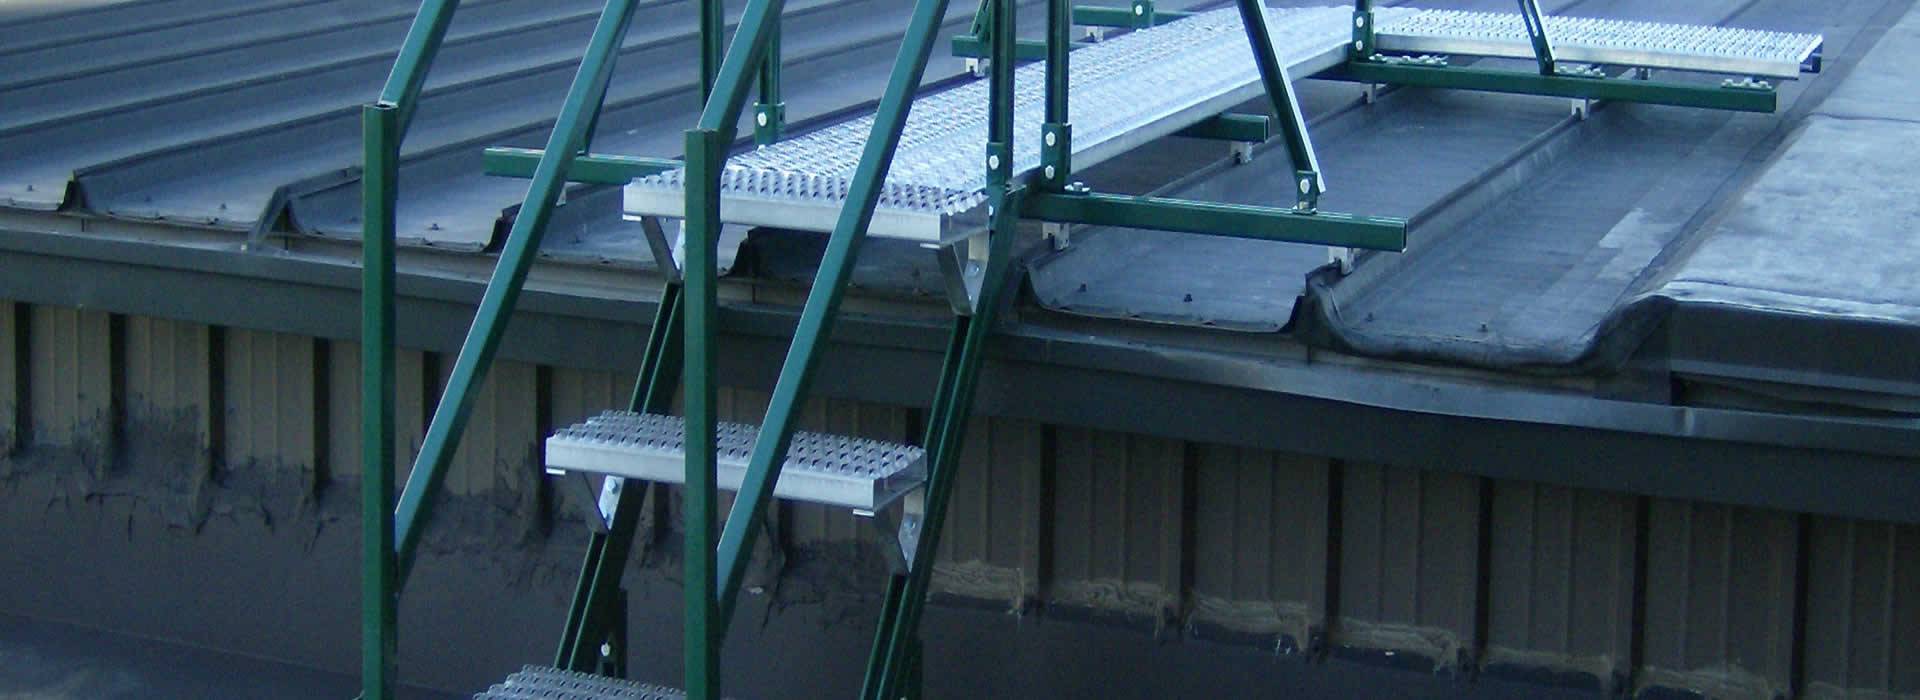 Diamond-Strut safety grating used as rooftop safety grating to resist any falls.